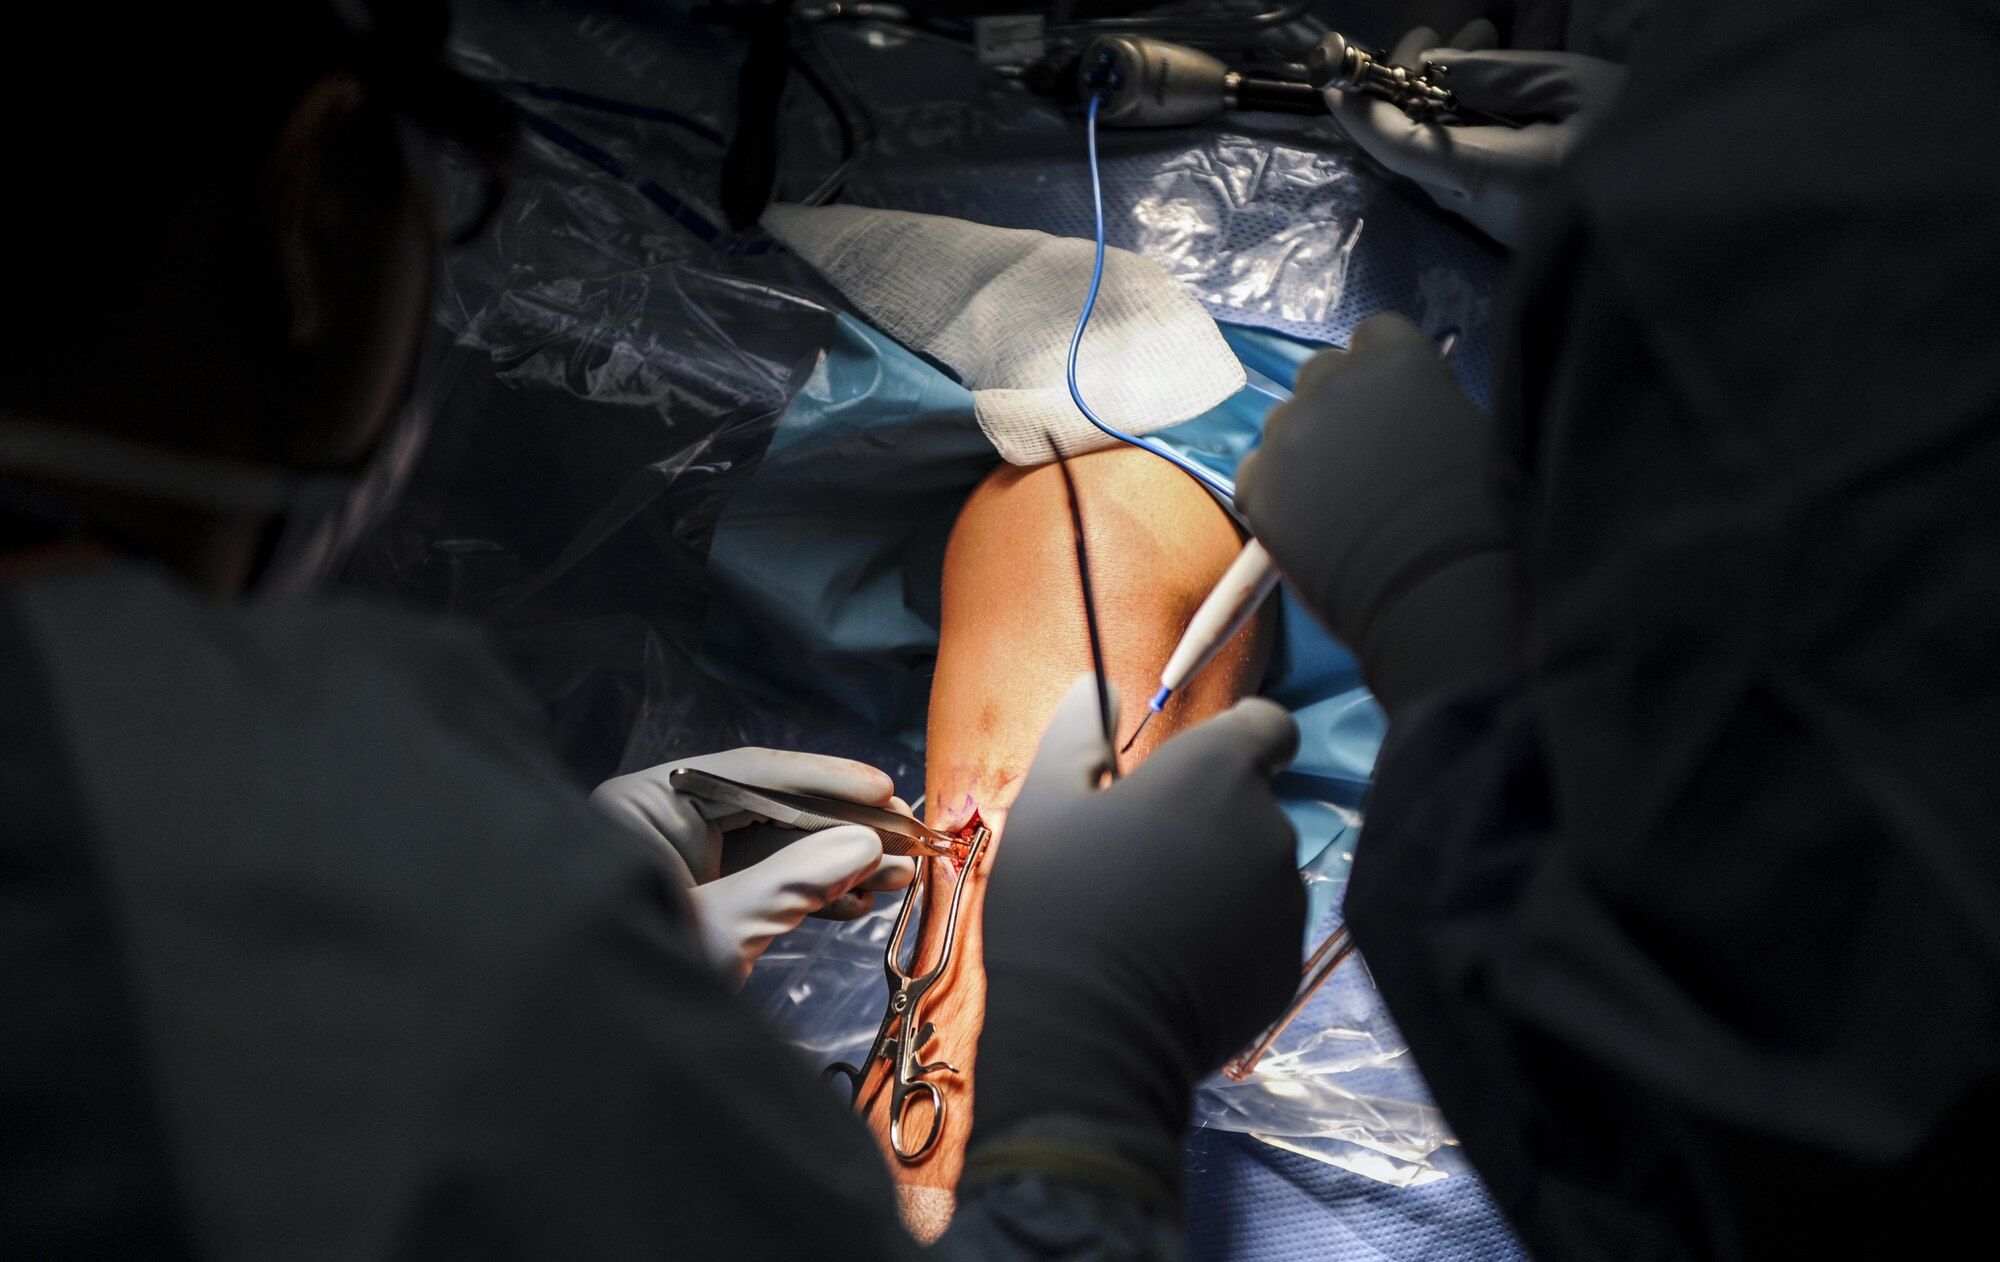 Maj. Ryan Swope, 99th Surgical Operations Squadron orthopedic surgeon, makes an incision during a surgery to repair an Airman’s ACL at the Mike O’Callaghan Federal Medical Center on Nellis Air Force Base, Nev., Oct. 17, 2016. The 99th Surgical Operations Squadron goal is to get Airmen back to their mission by providing surgical services in any manner that they need in. (U.S. Air Force photo by Airman 1st Class Kevin Tanenbaum/Released)